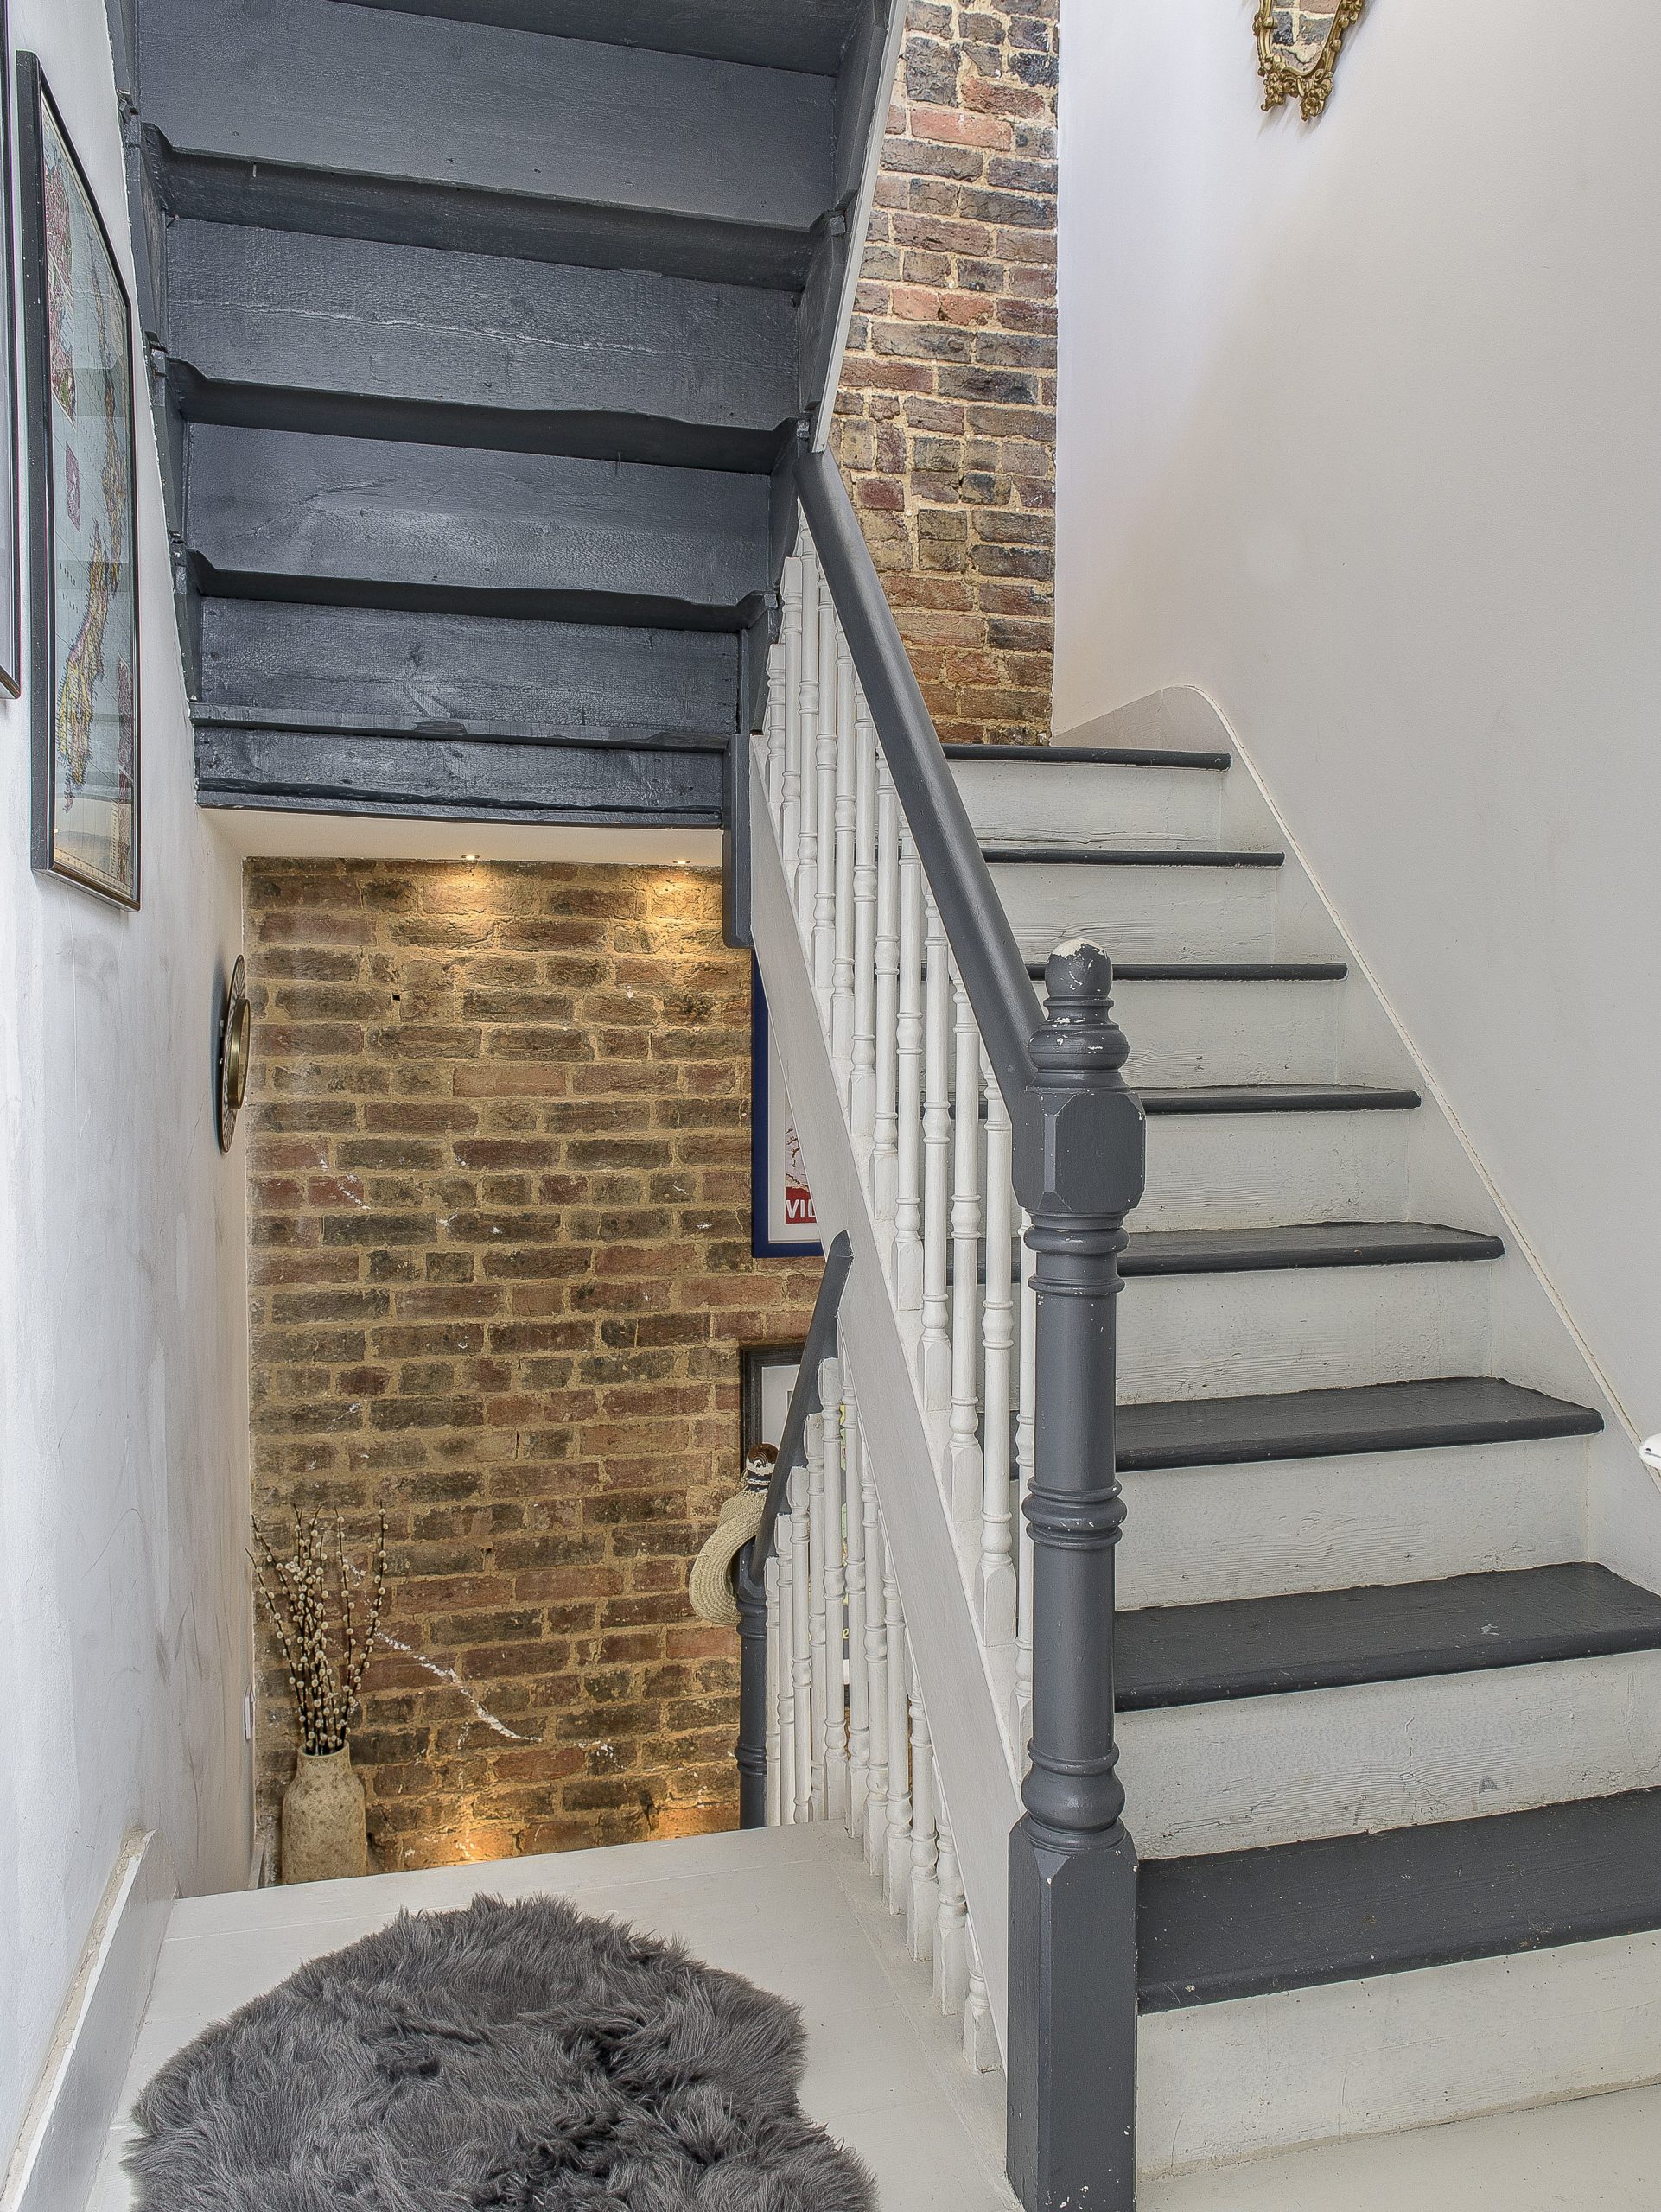 The house has a distinctly artistic loft atmosphere with exposed brickwork and a palette of whites and greys. 